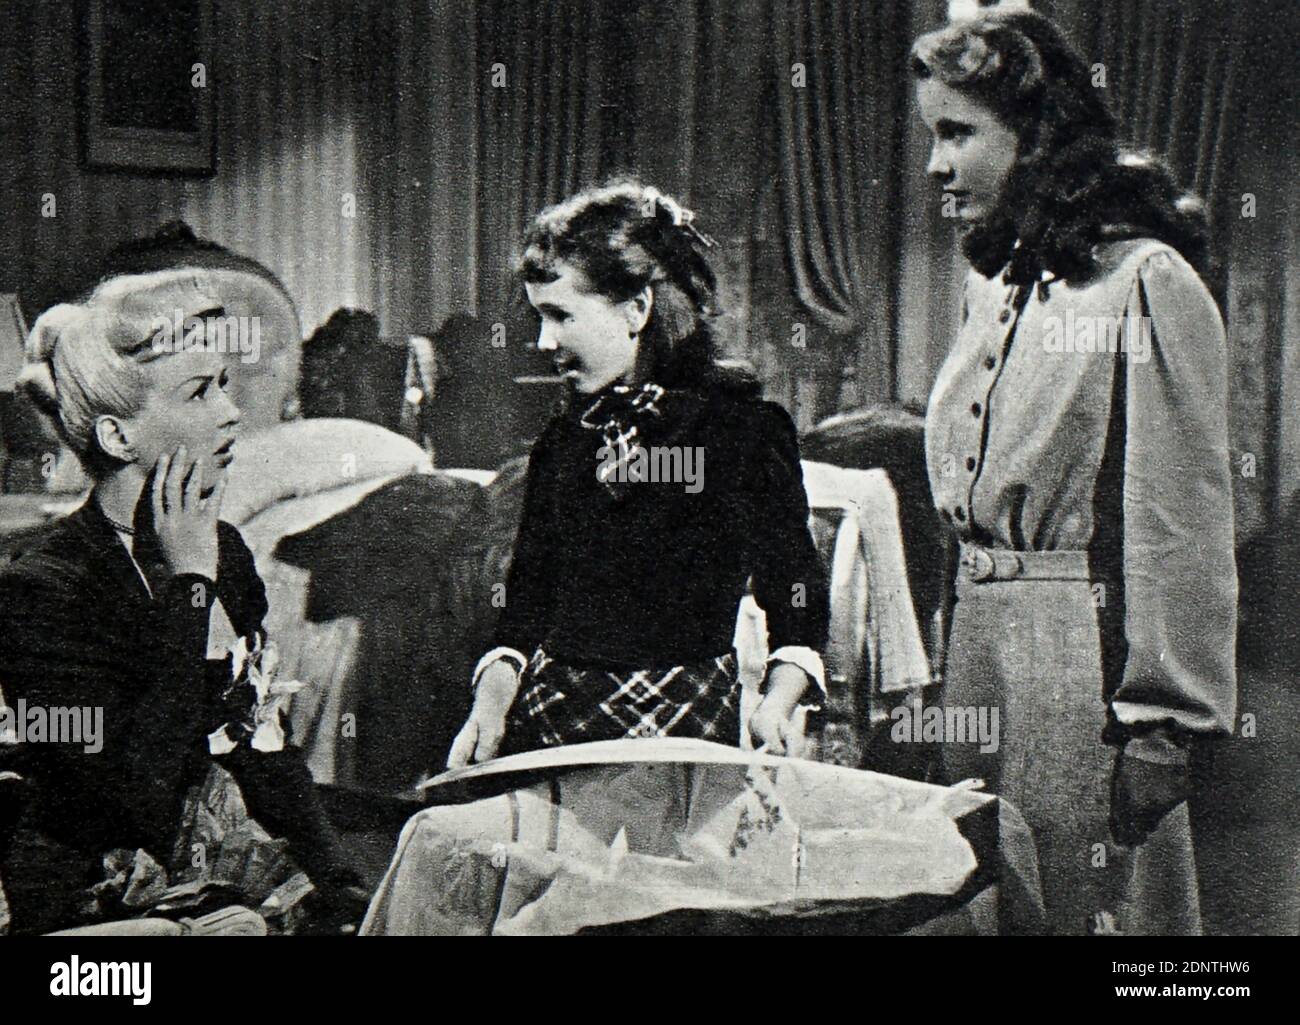 Film still from 'Mother Wore Tights' starring Betty Grable, Mona Freeman, Dan Dailey, and Lee Patrick. Stock Photo